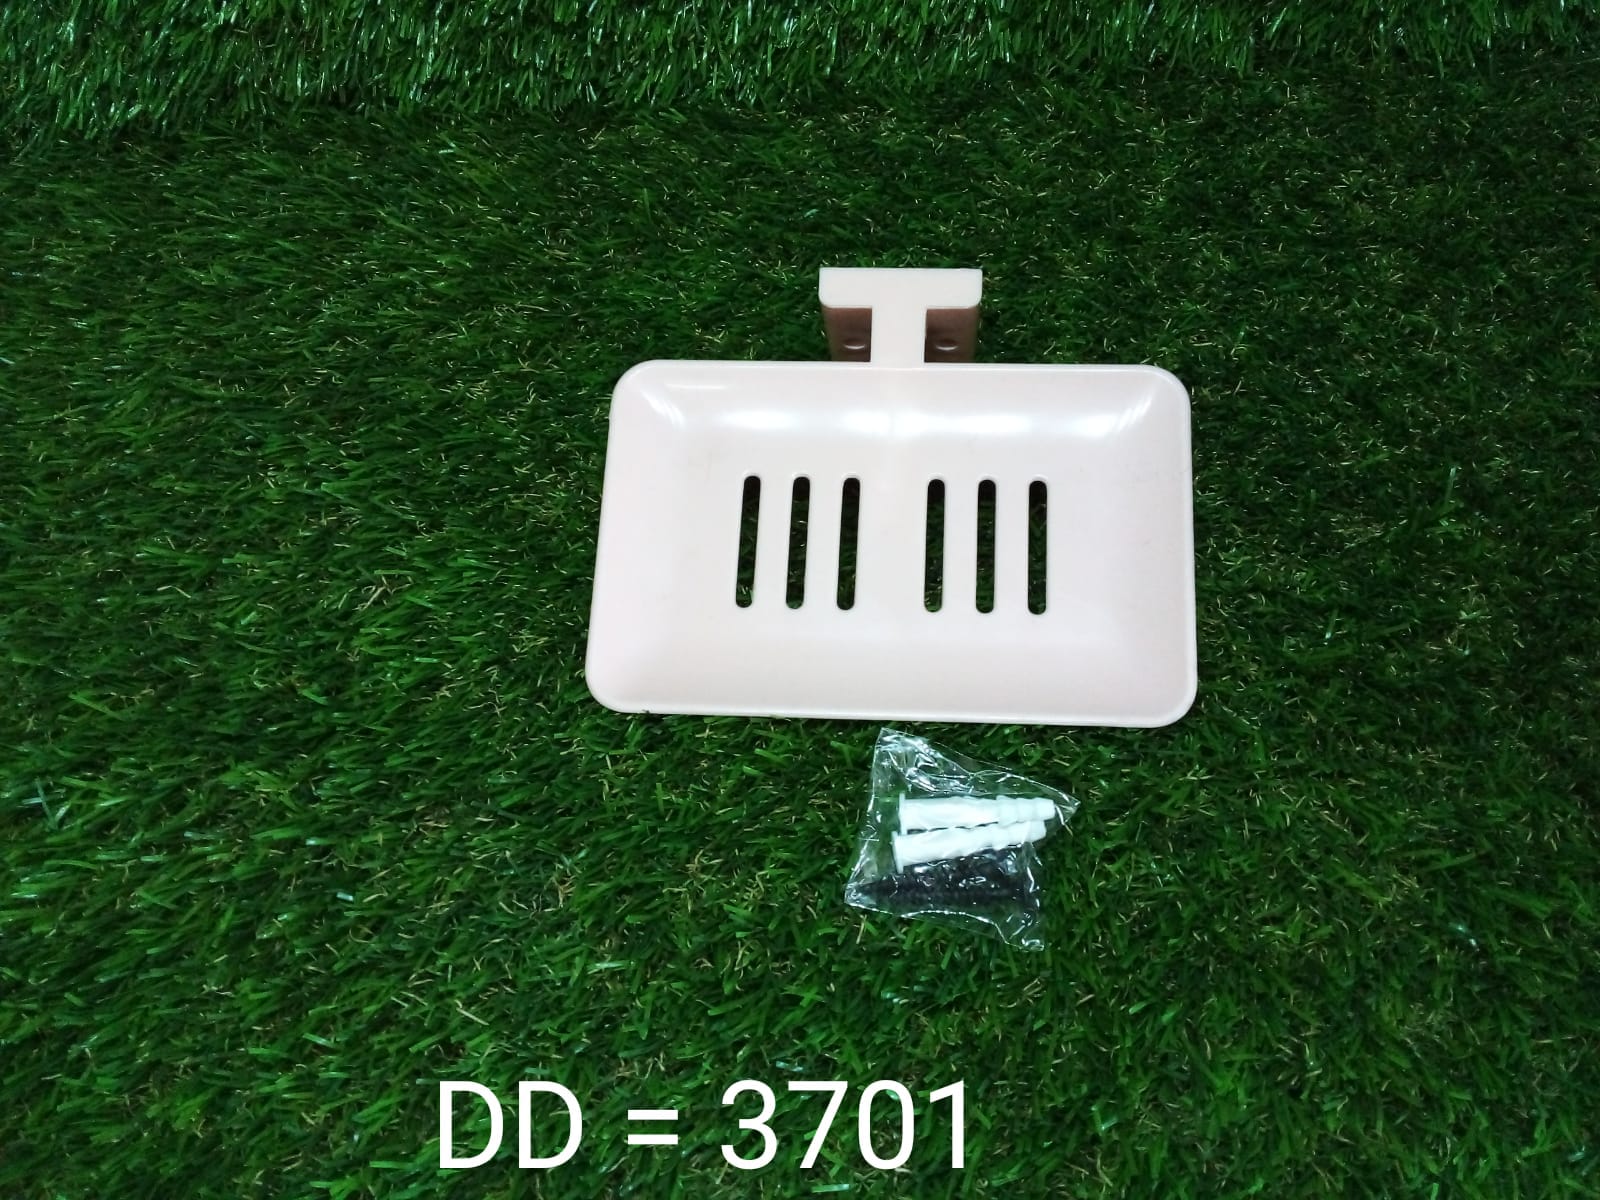 3701 Bath Wall Soap Dish widely used by all types of peoples for holding and as a soap stand in all kinds of bathroom places etc. DeoDap